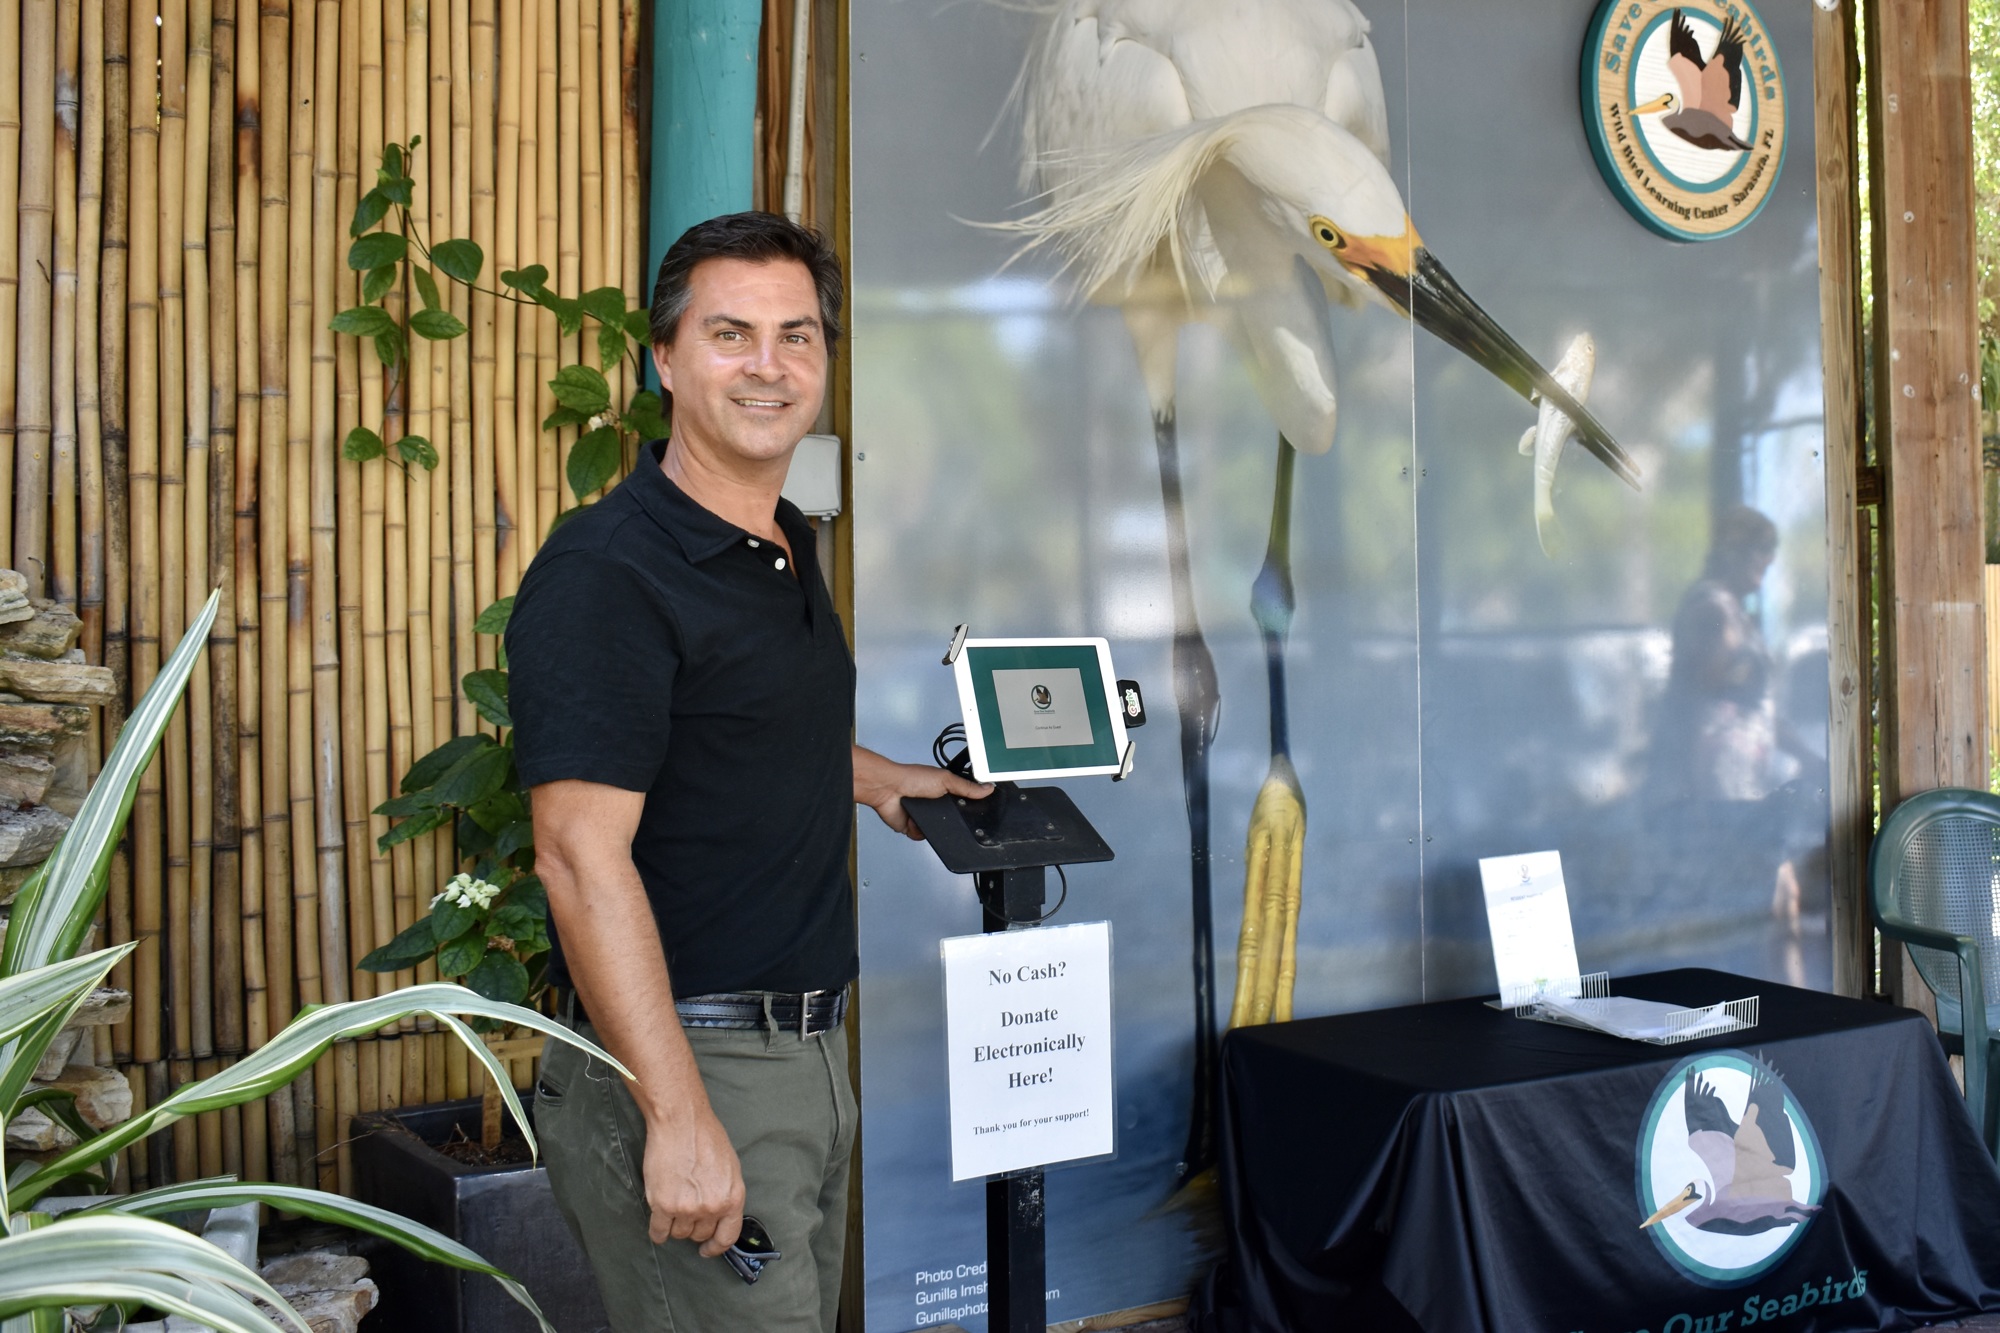 CEO Aaron Virgin at Save Our Seabirds. SOS now accepts electronic donations. (Photo by Lesley Dwyer)